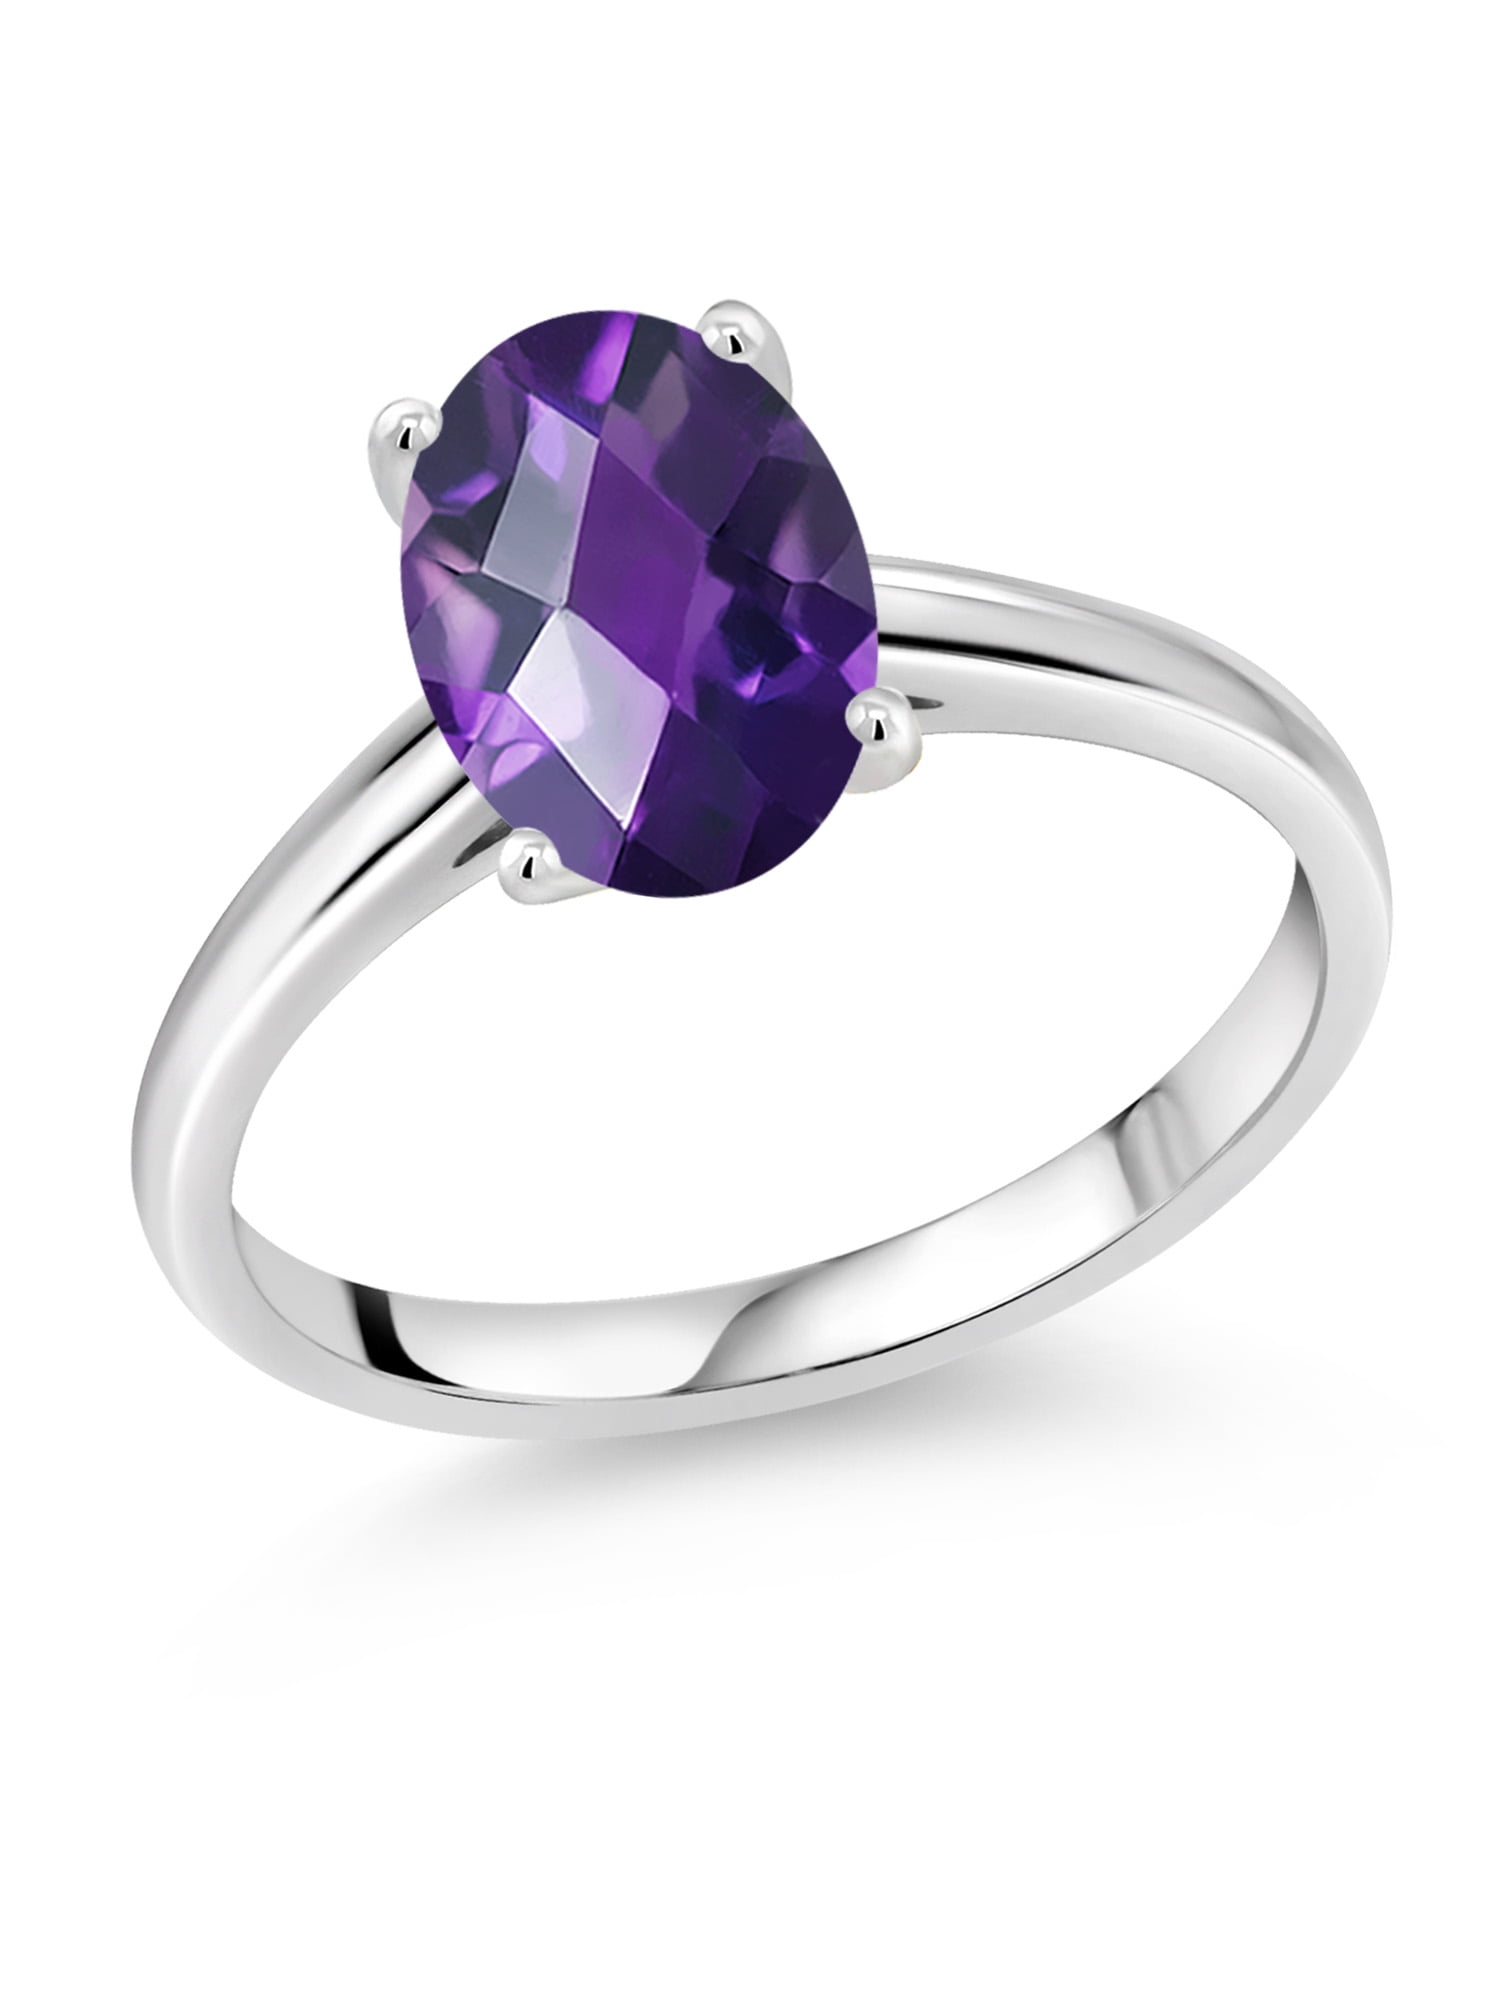 Gem Stone King 1.20 Ct Oval Checkerboard Purple Amethyst 10K White Gold Ring